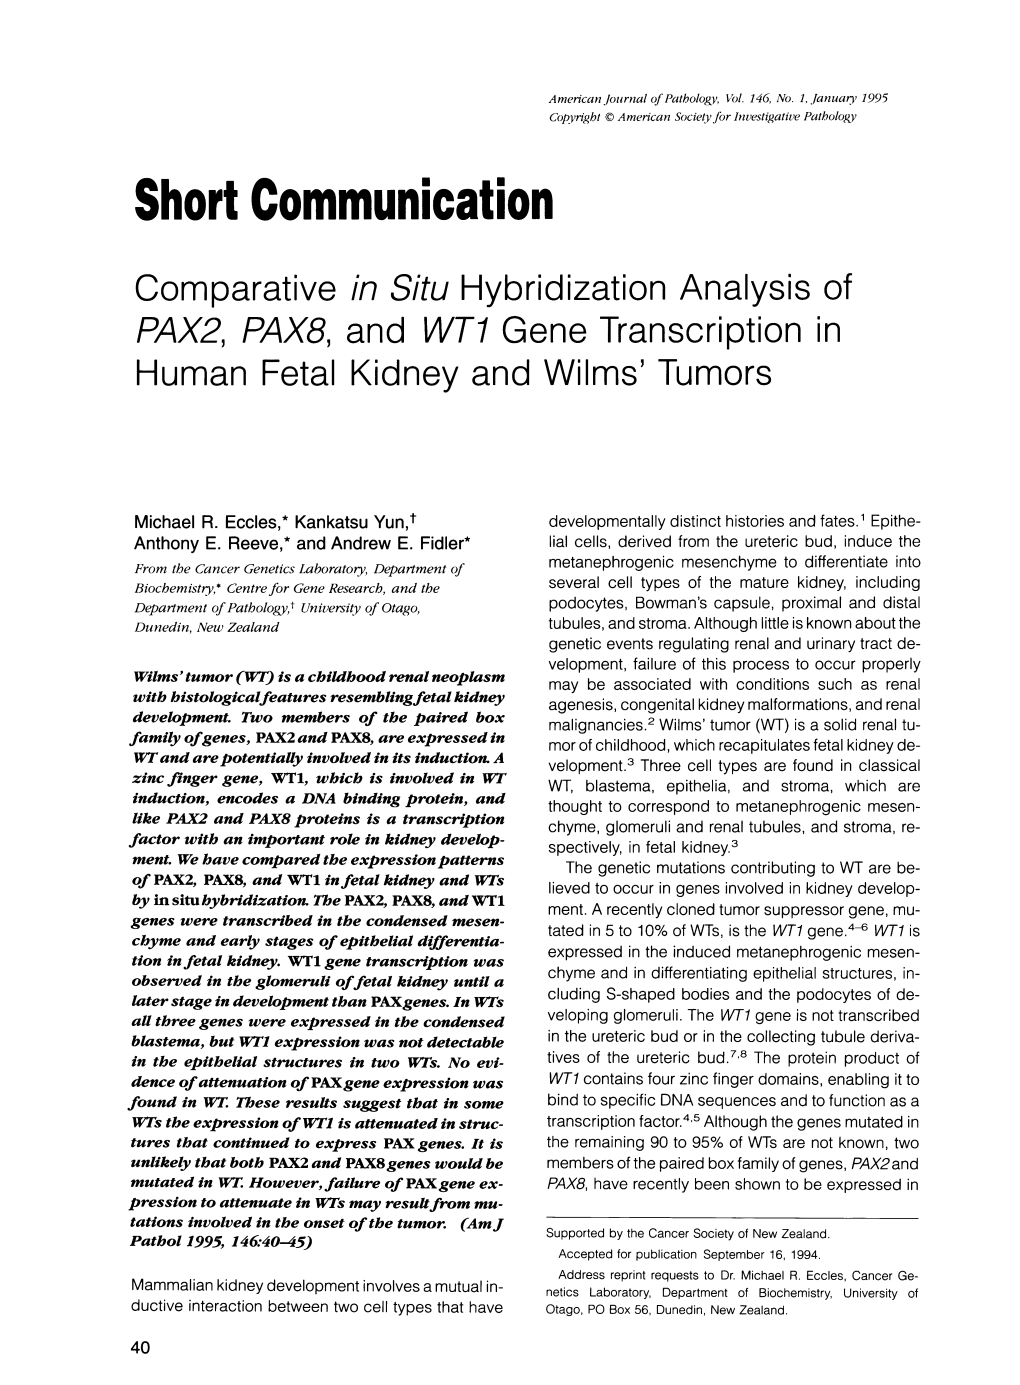 Comparative in Situ Hybridization Analysis of PAX2, PAX8, and WT1 Gene Transcription in Human Fetal Kidney and Wilms' Tumors